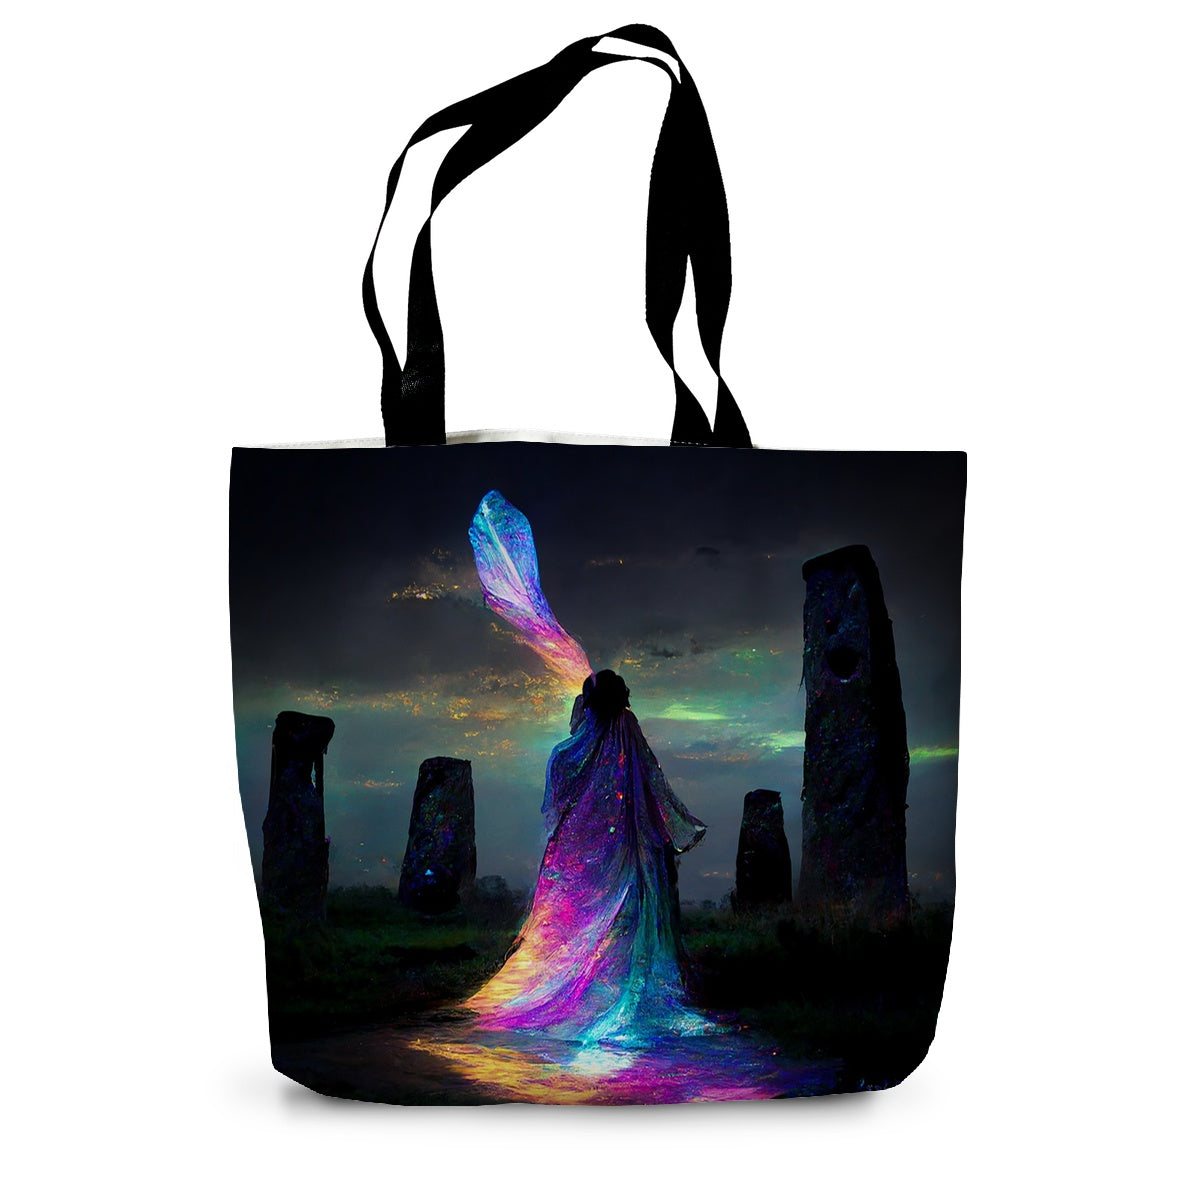 Iridescent energy fairy amongst ancient standing stones 1 Canvas Tote Bag